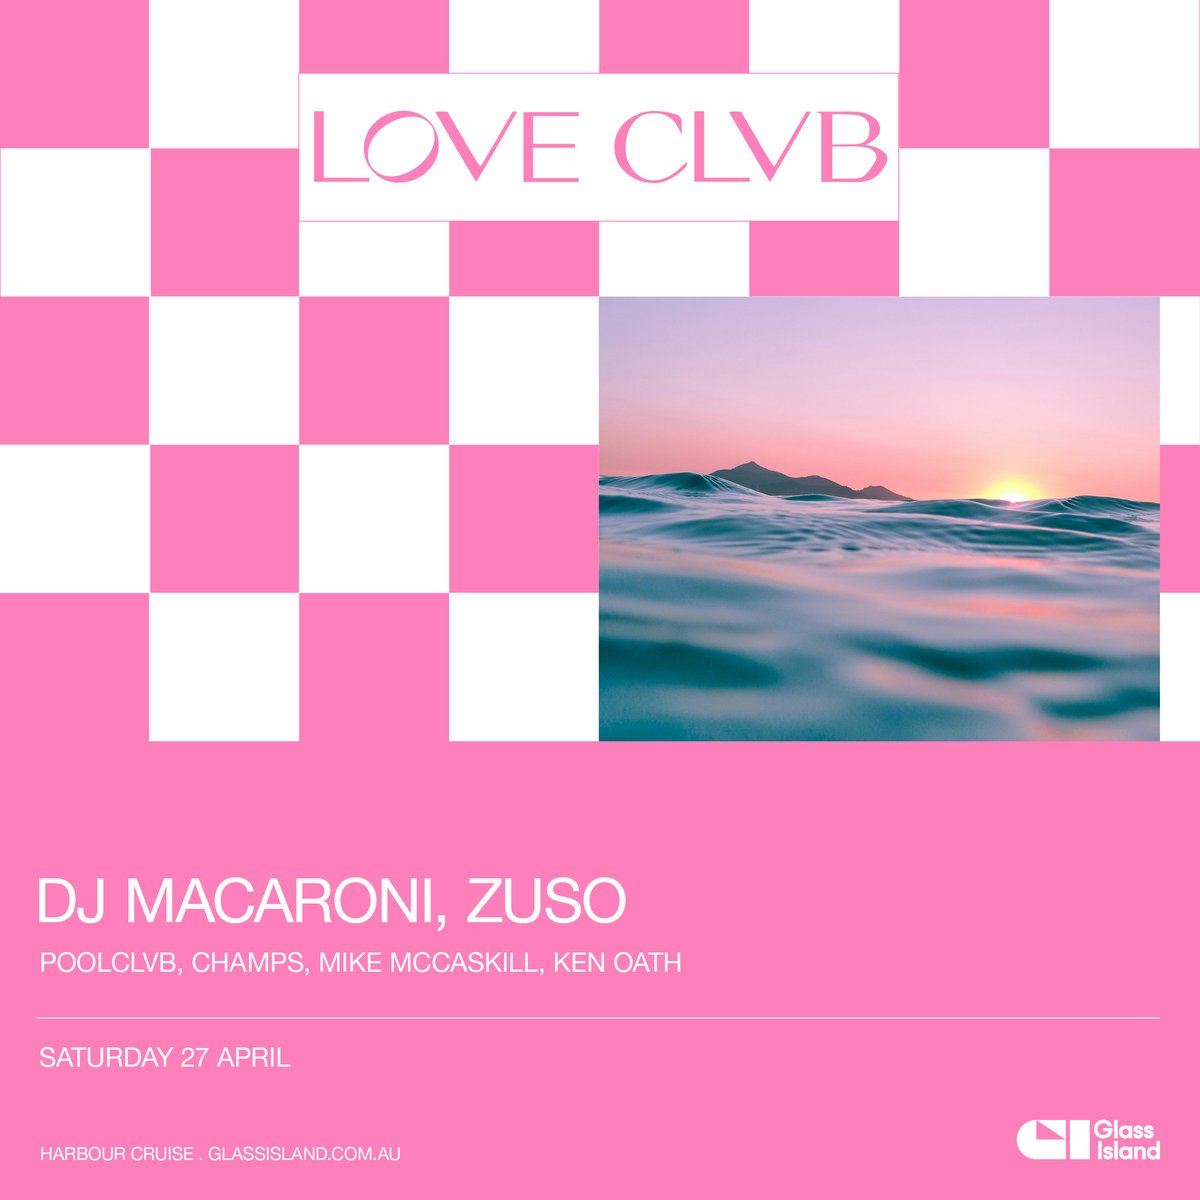 🩷⛴️ SYDNEY 🩷⛴️ If you're looking for something to do this Saturday, get down to the LOVE CLVB on Glass Island with DJ Macaroni, @MusicZuso, @POOLCLVB, Champs, Mike McCaskill & Ken Oath Tickets: eventbrite.com.au/e/glass-island…